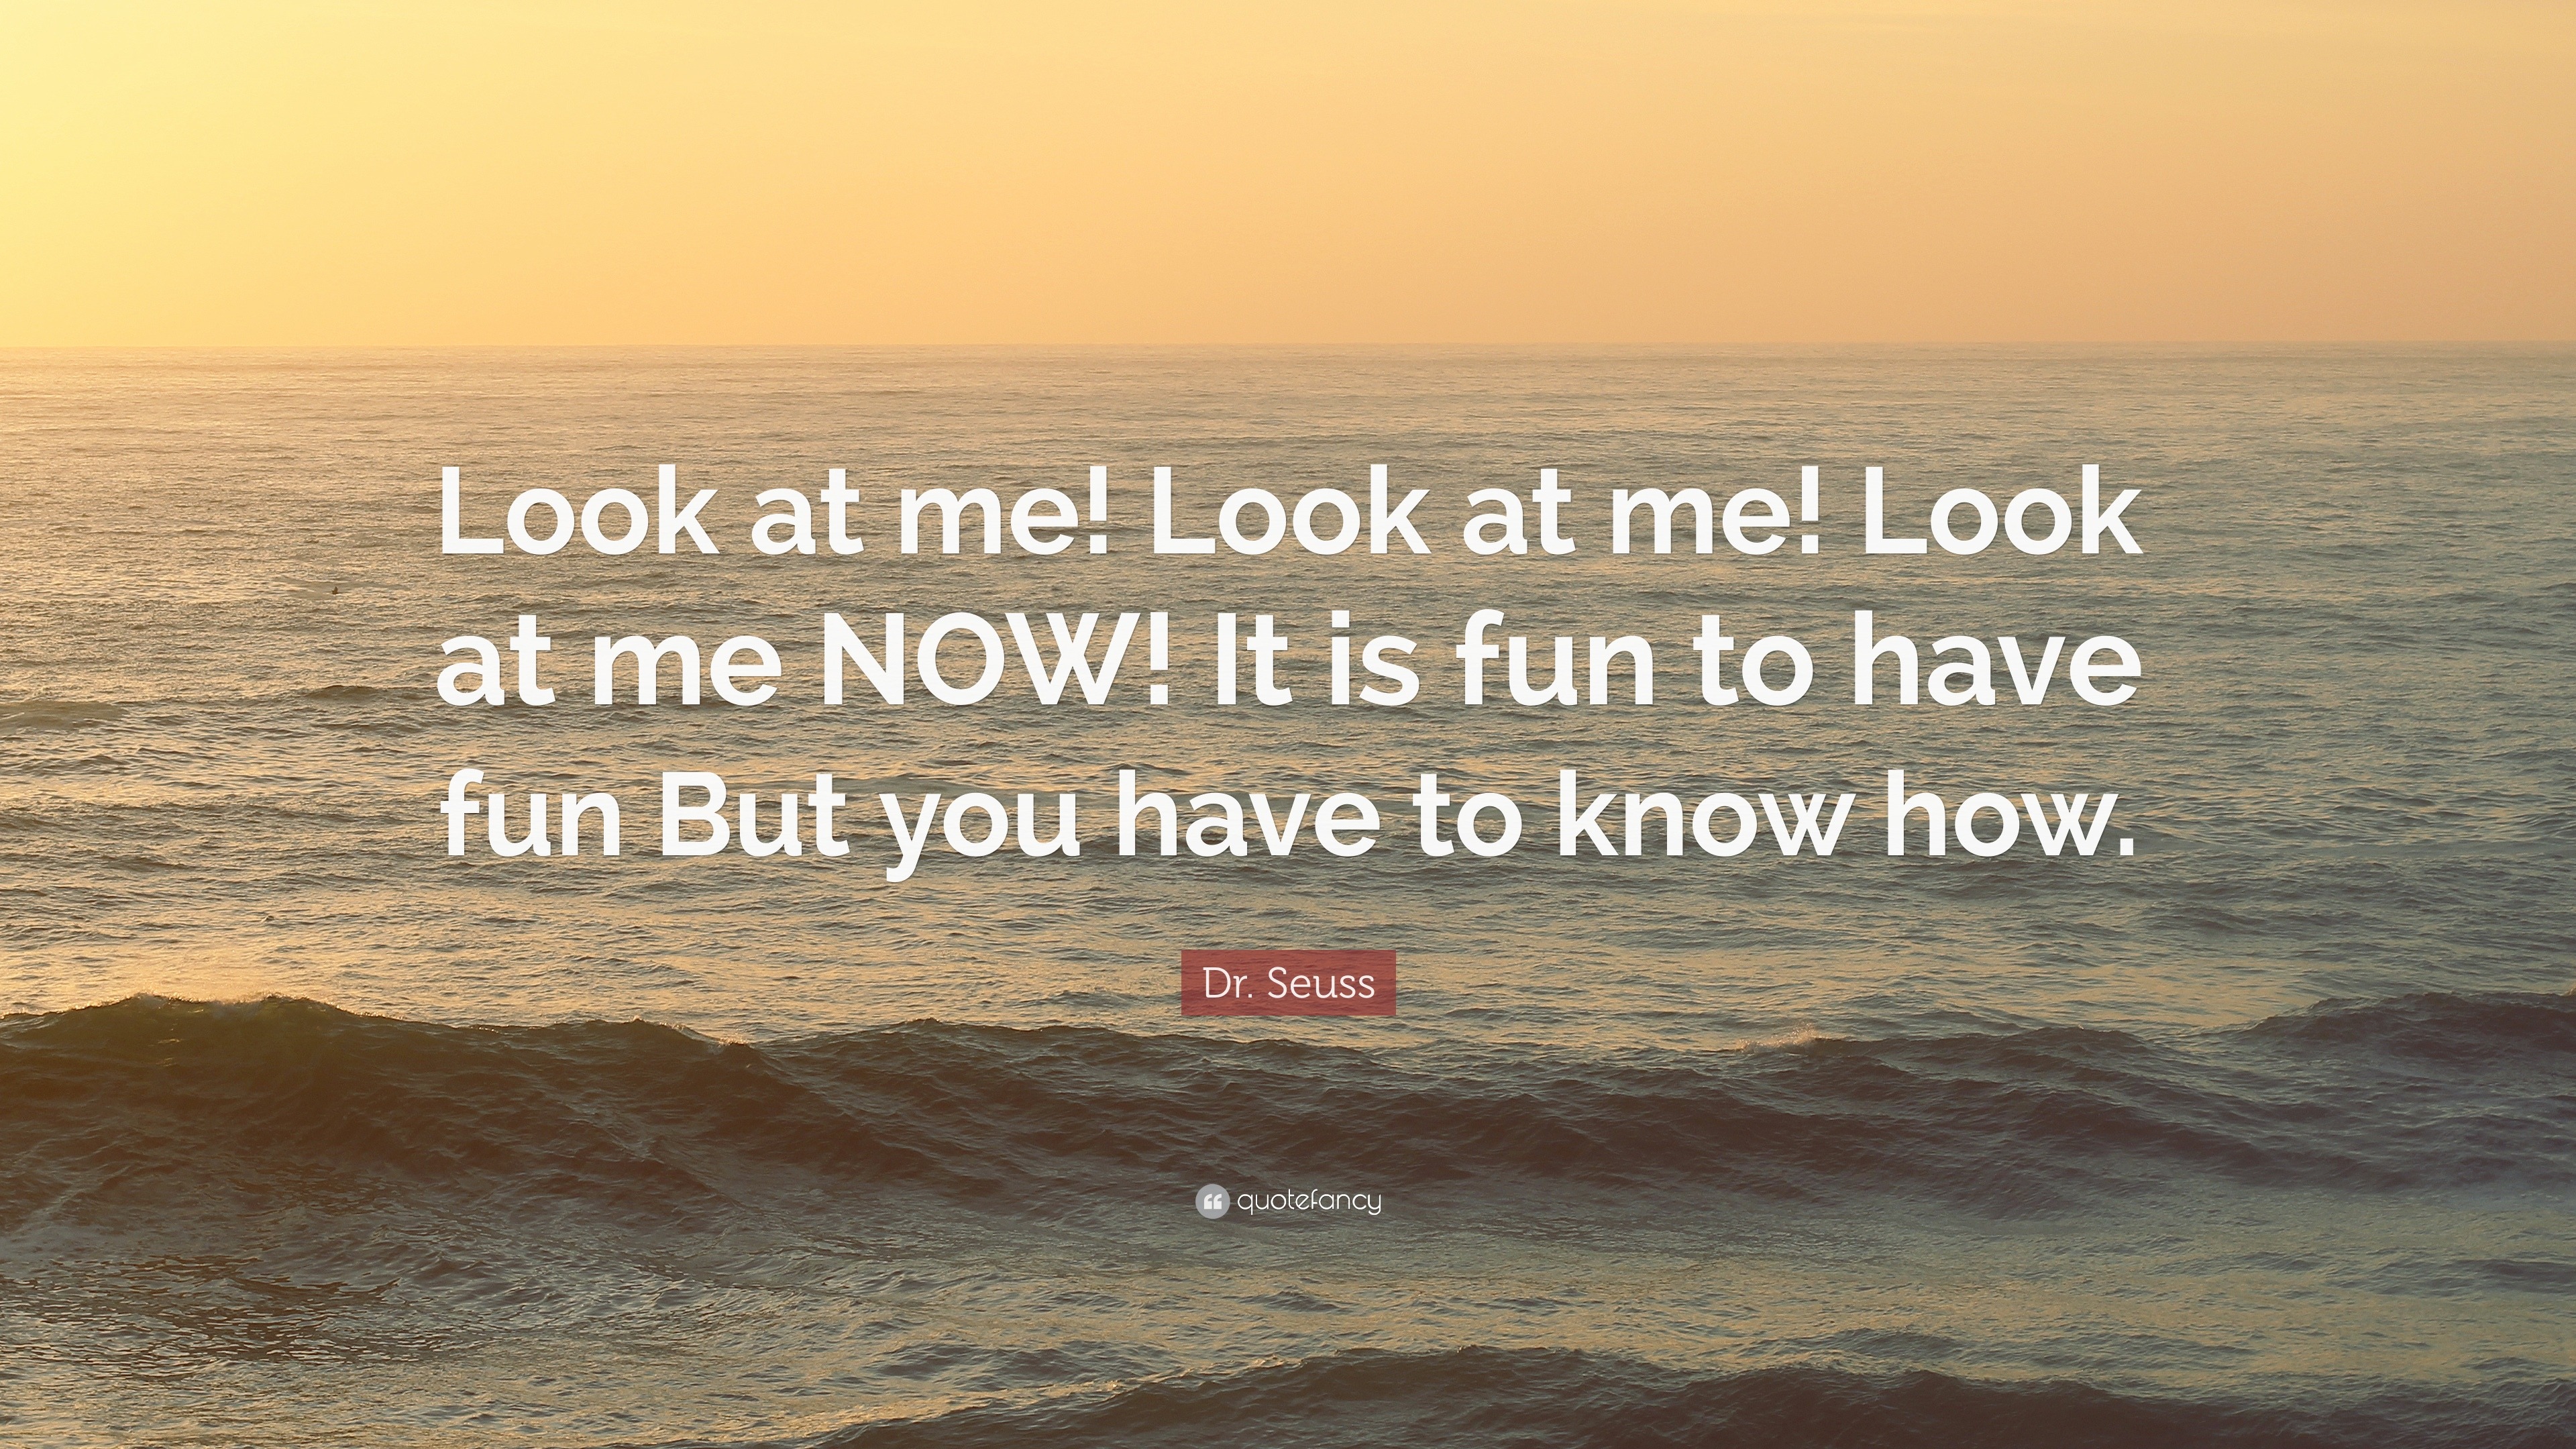 Dr. Seuss Quote: “Look at me! Look at me! Look at me NOW! It is fun to